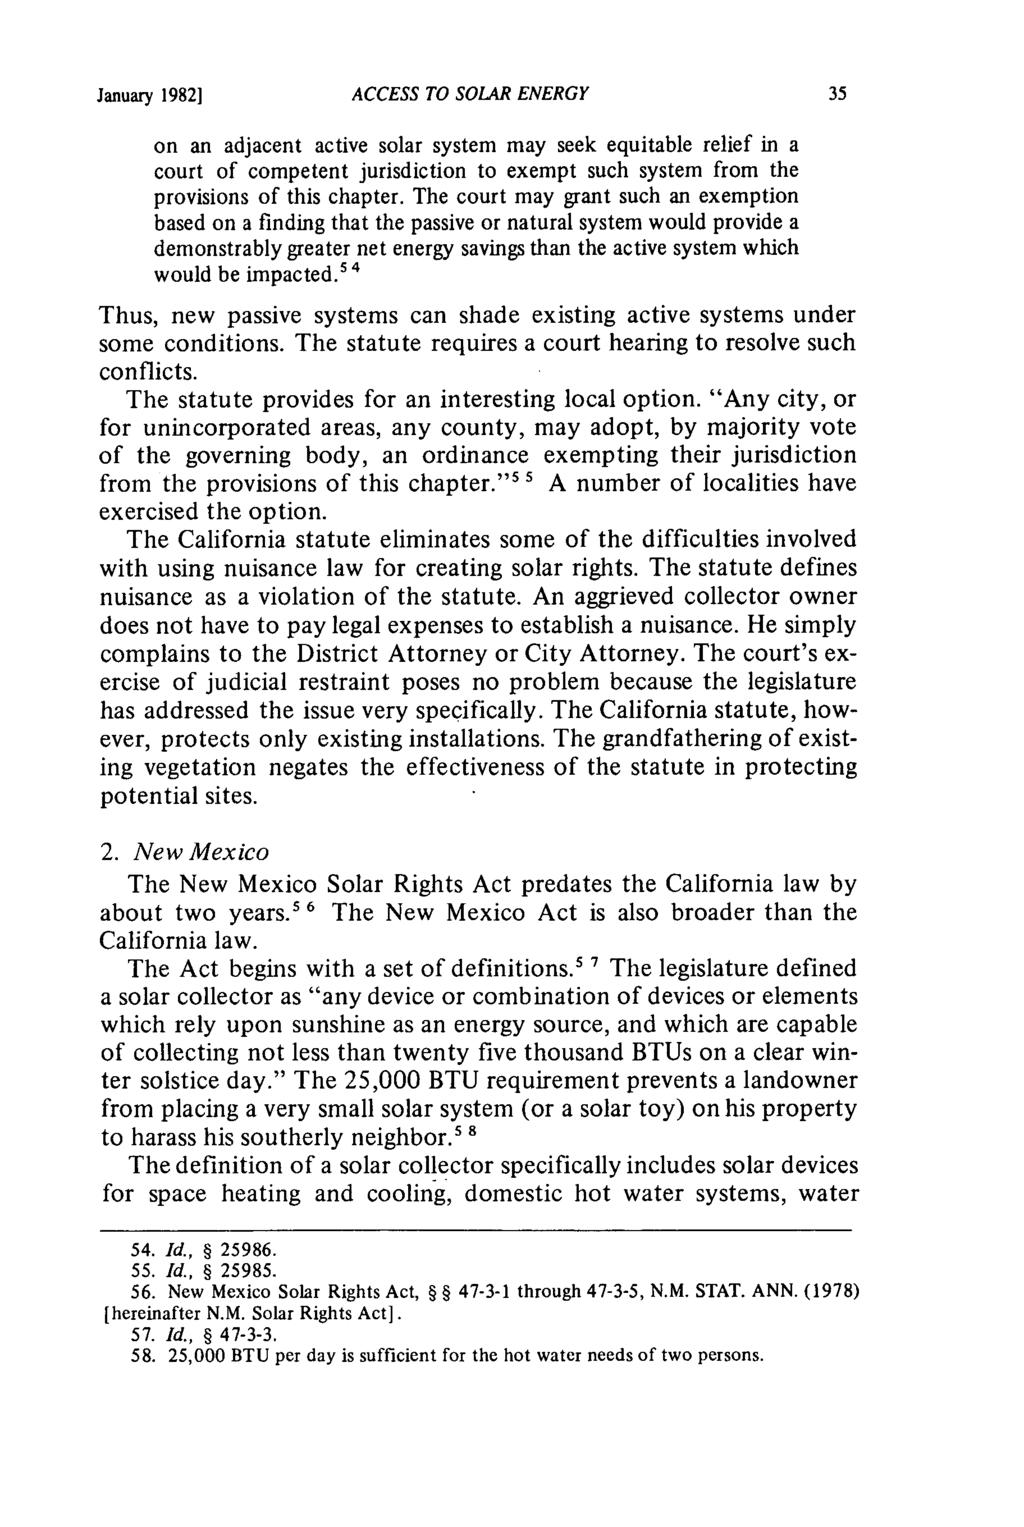 January 19821 ACCESS TO SOLAR ENERGY on an adjacent active solar system may seek equitable relief in a court of competent jurisdiction to exempt such system from the provisions of this chapter.